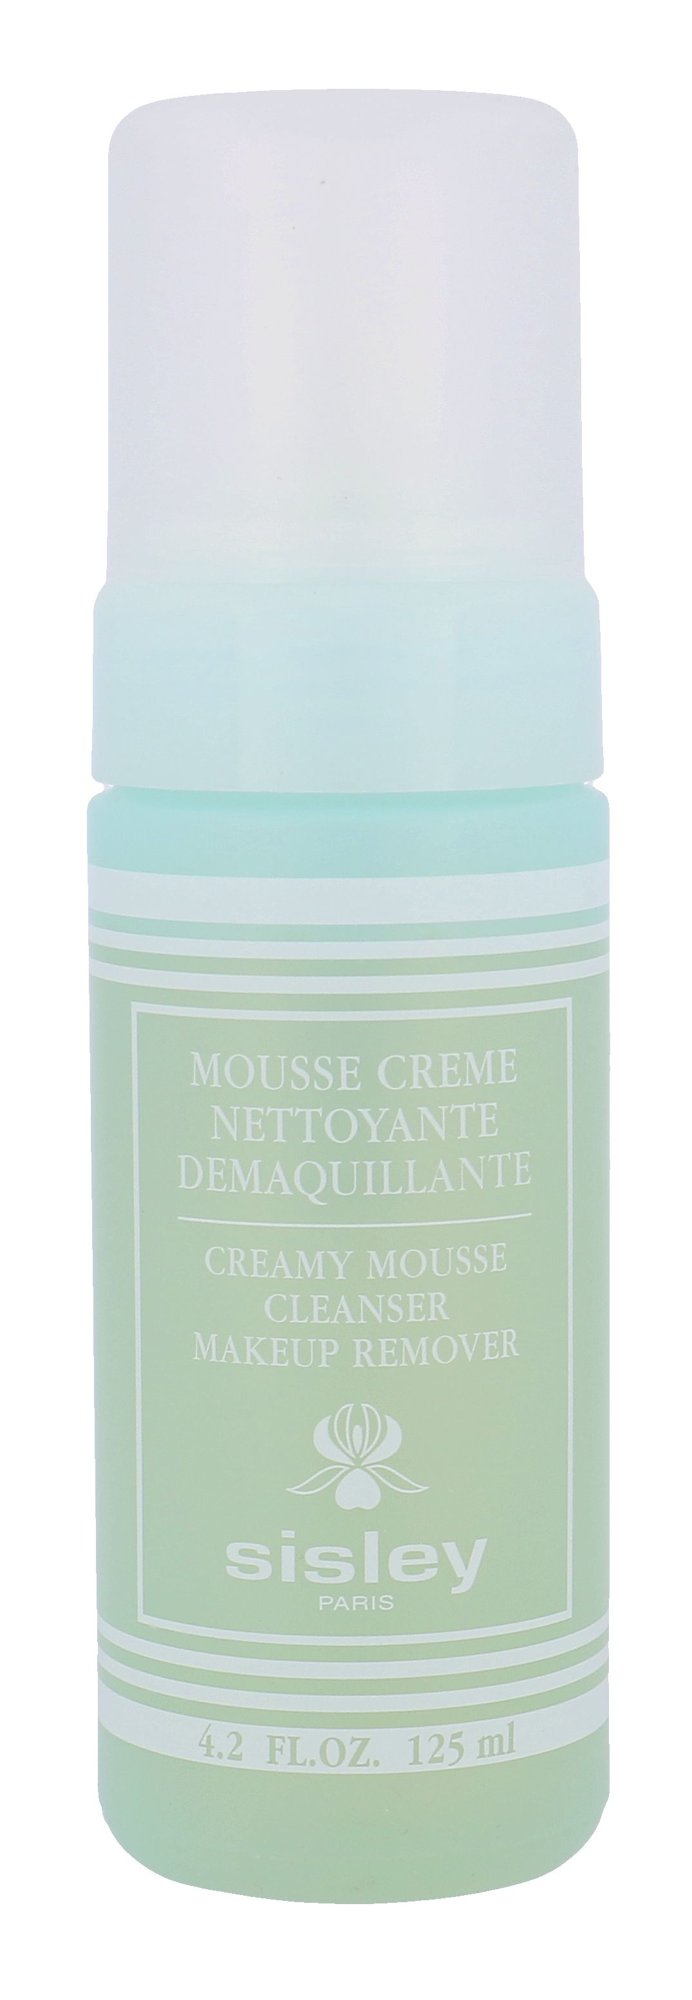 Sisley Creamy Mousse Cleanser